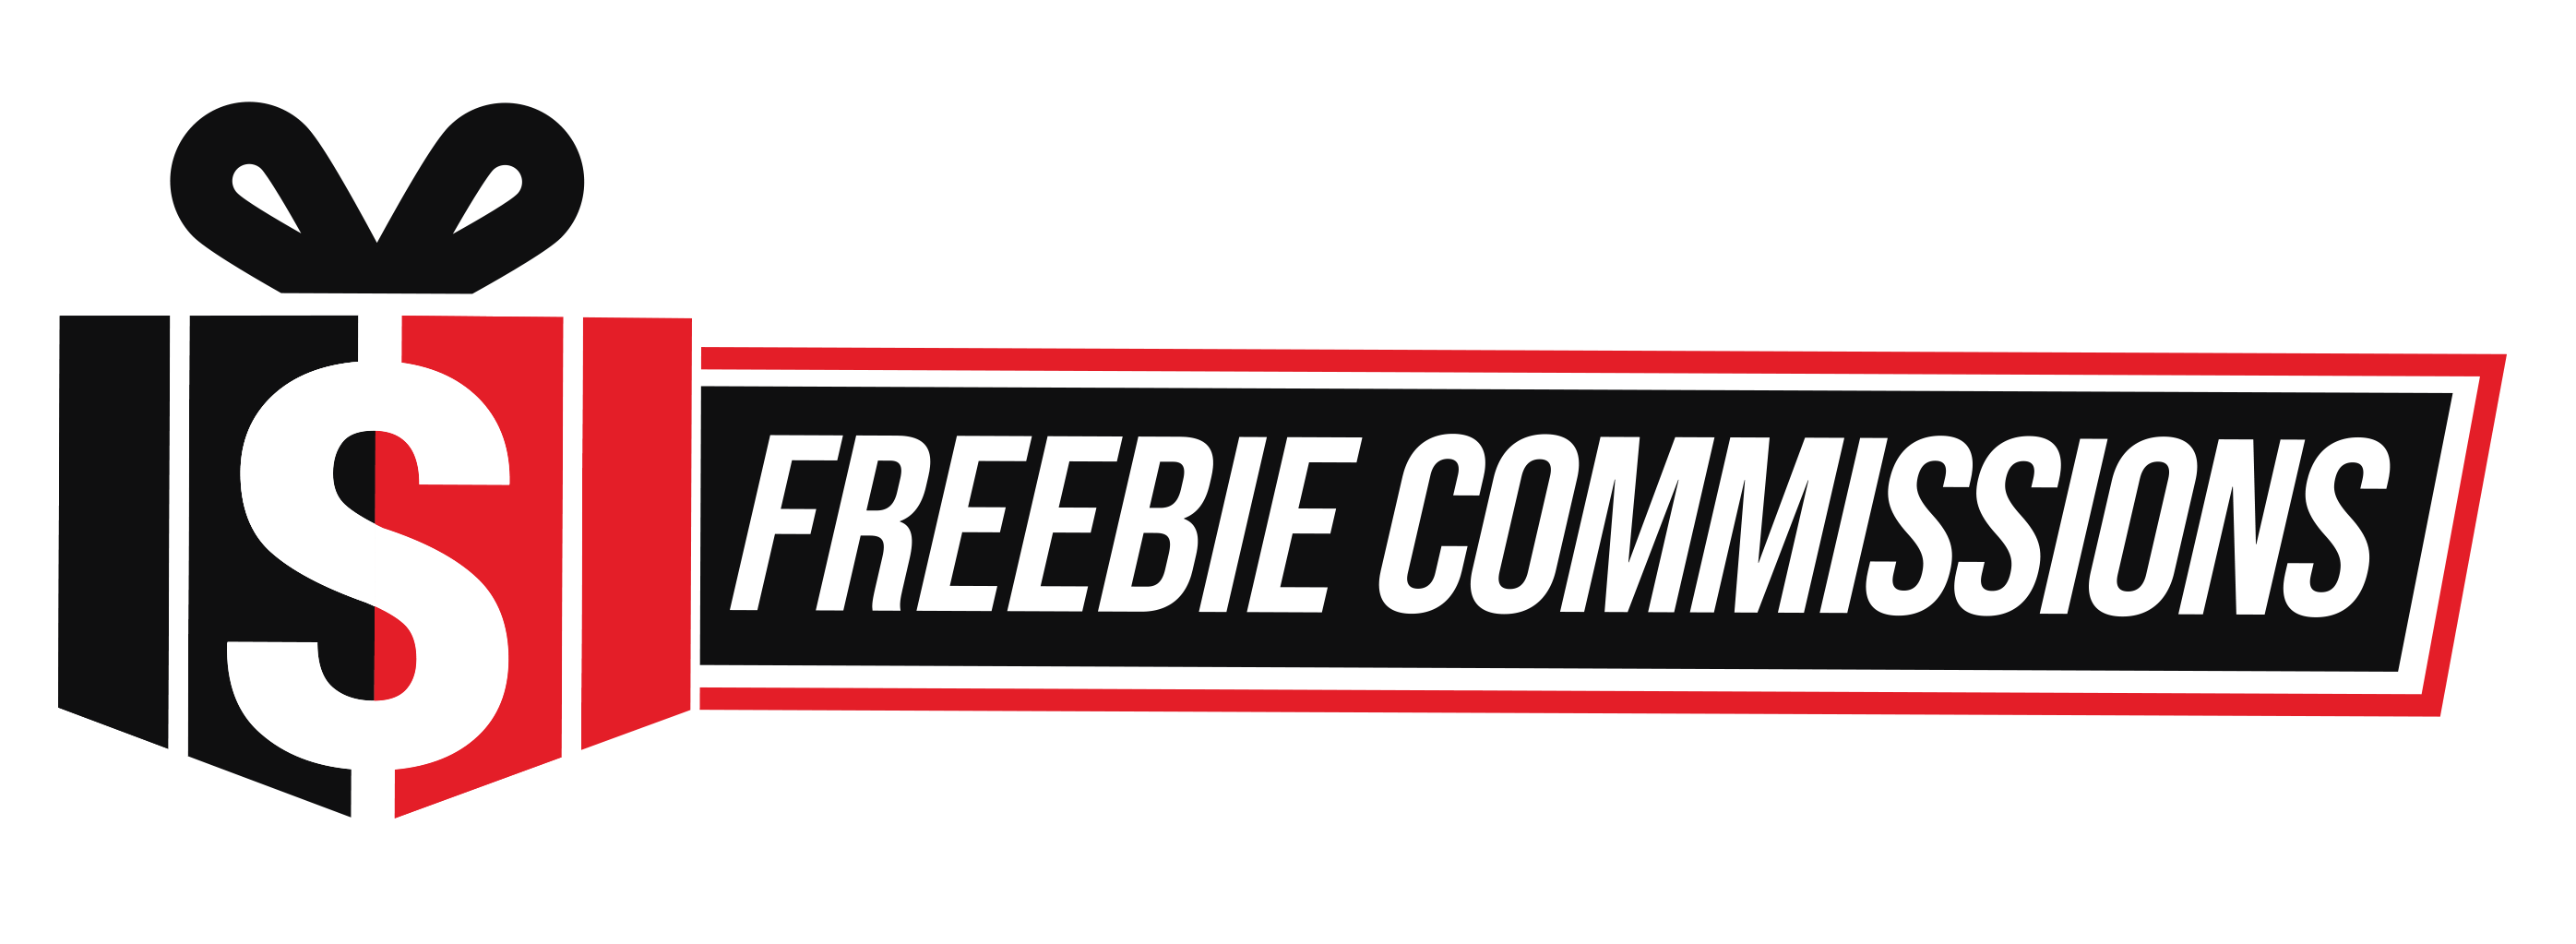 Freebie Commissions Review